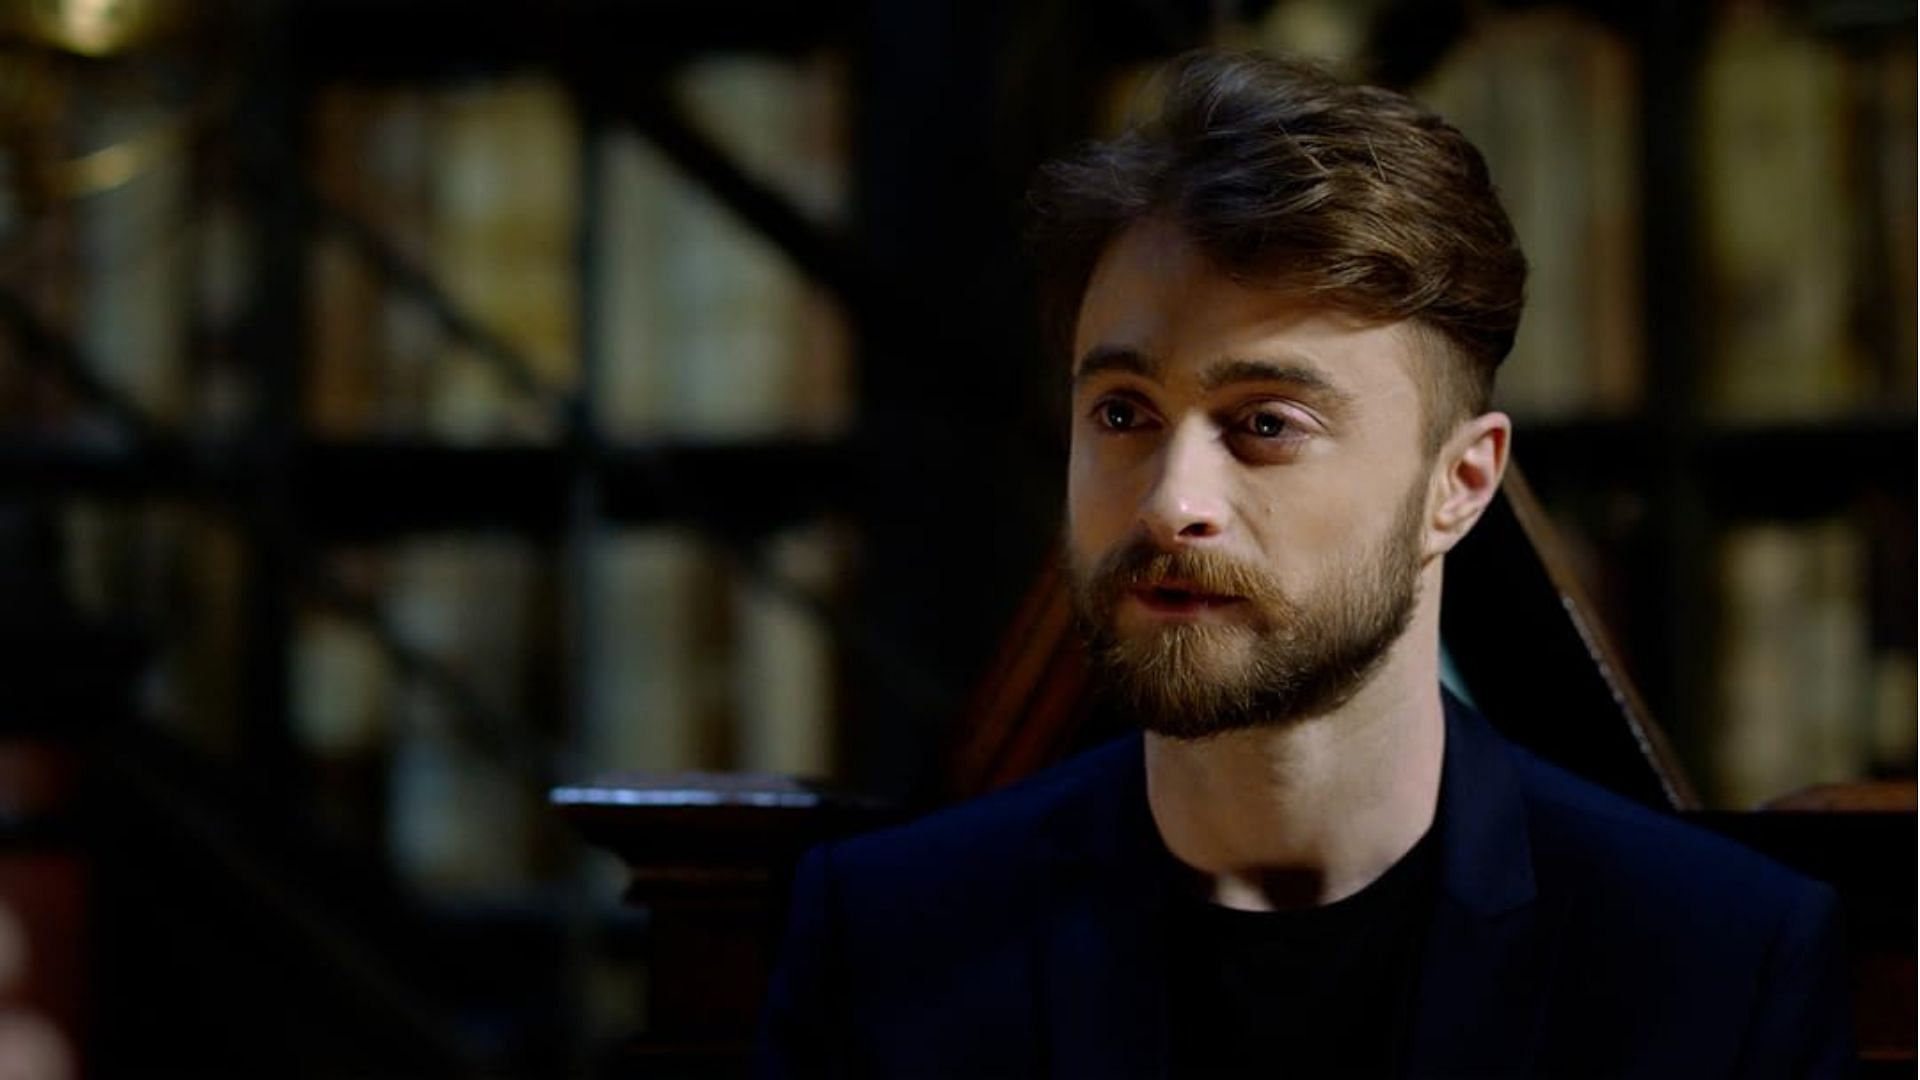 Daniel Radcliffe from Harry Potter 20th Anniversary: Return to Hogwarts (Image via Prime Video)